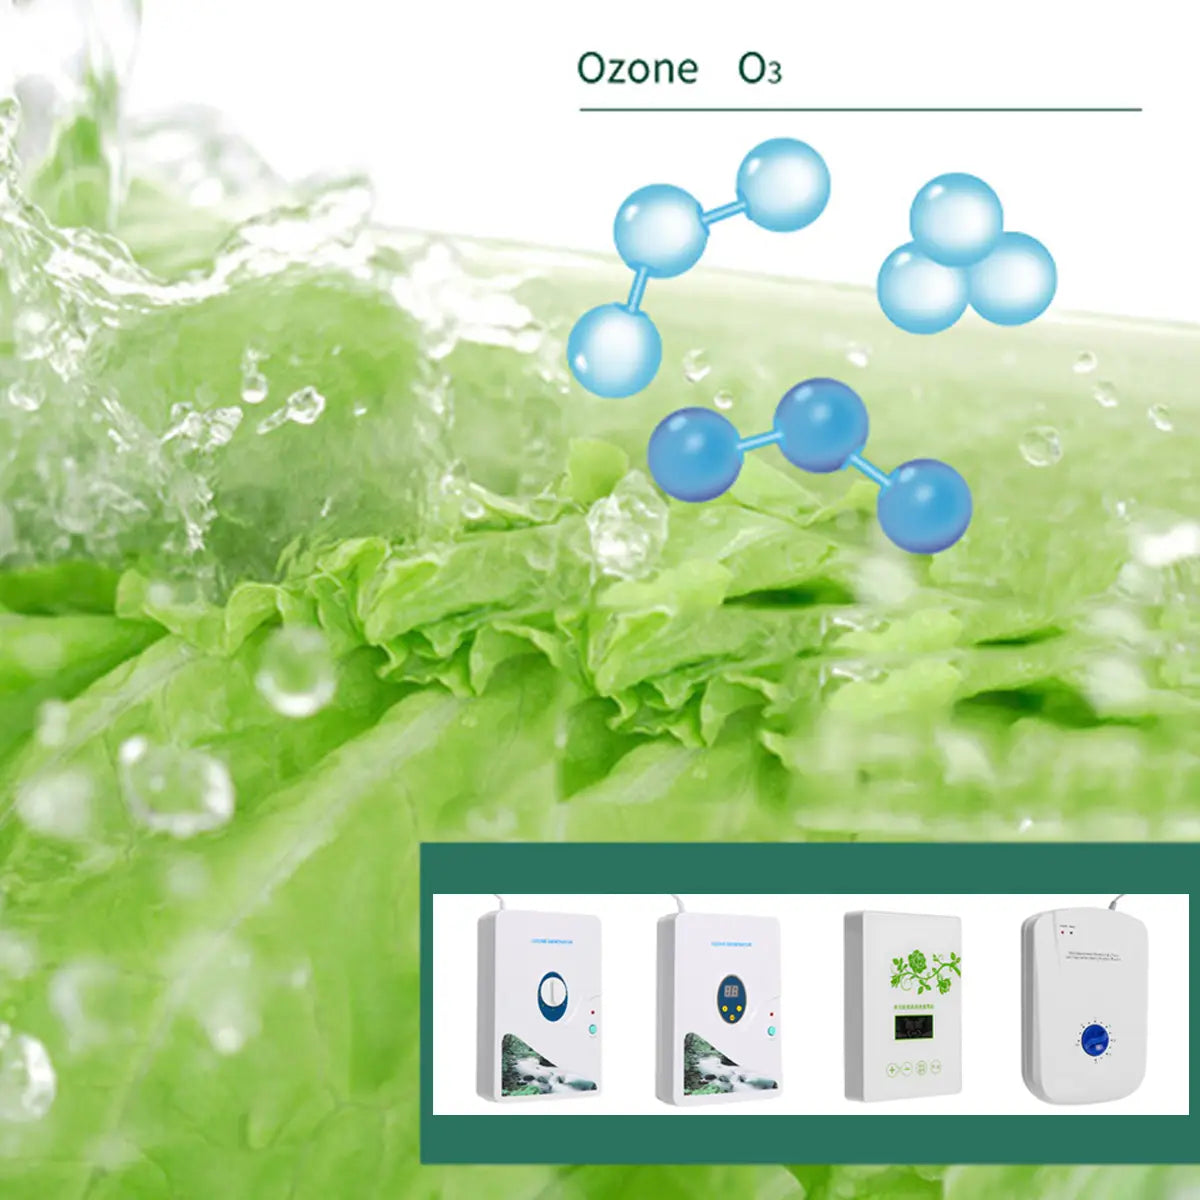 Ozone Air Purifier For Small Household Appliances Fruit